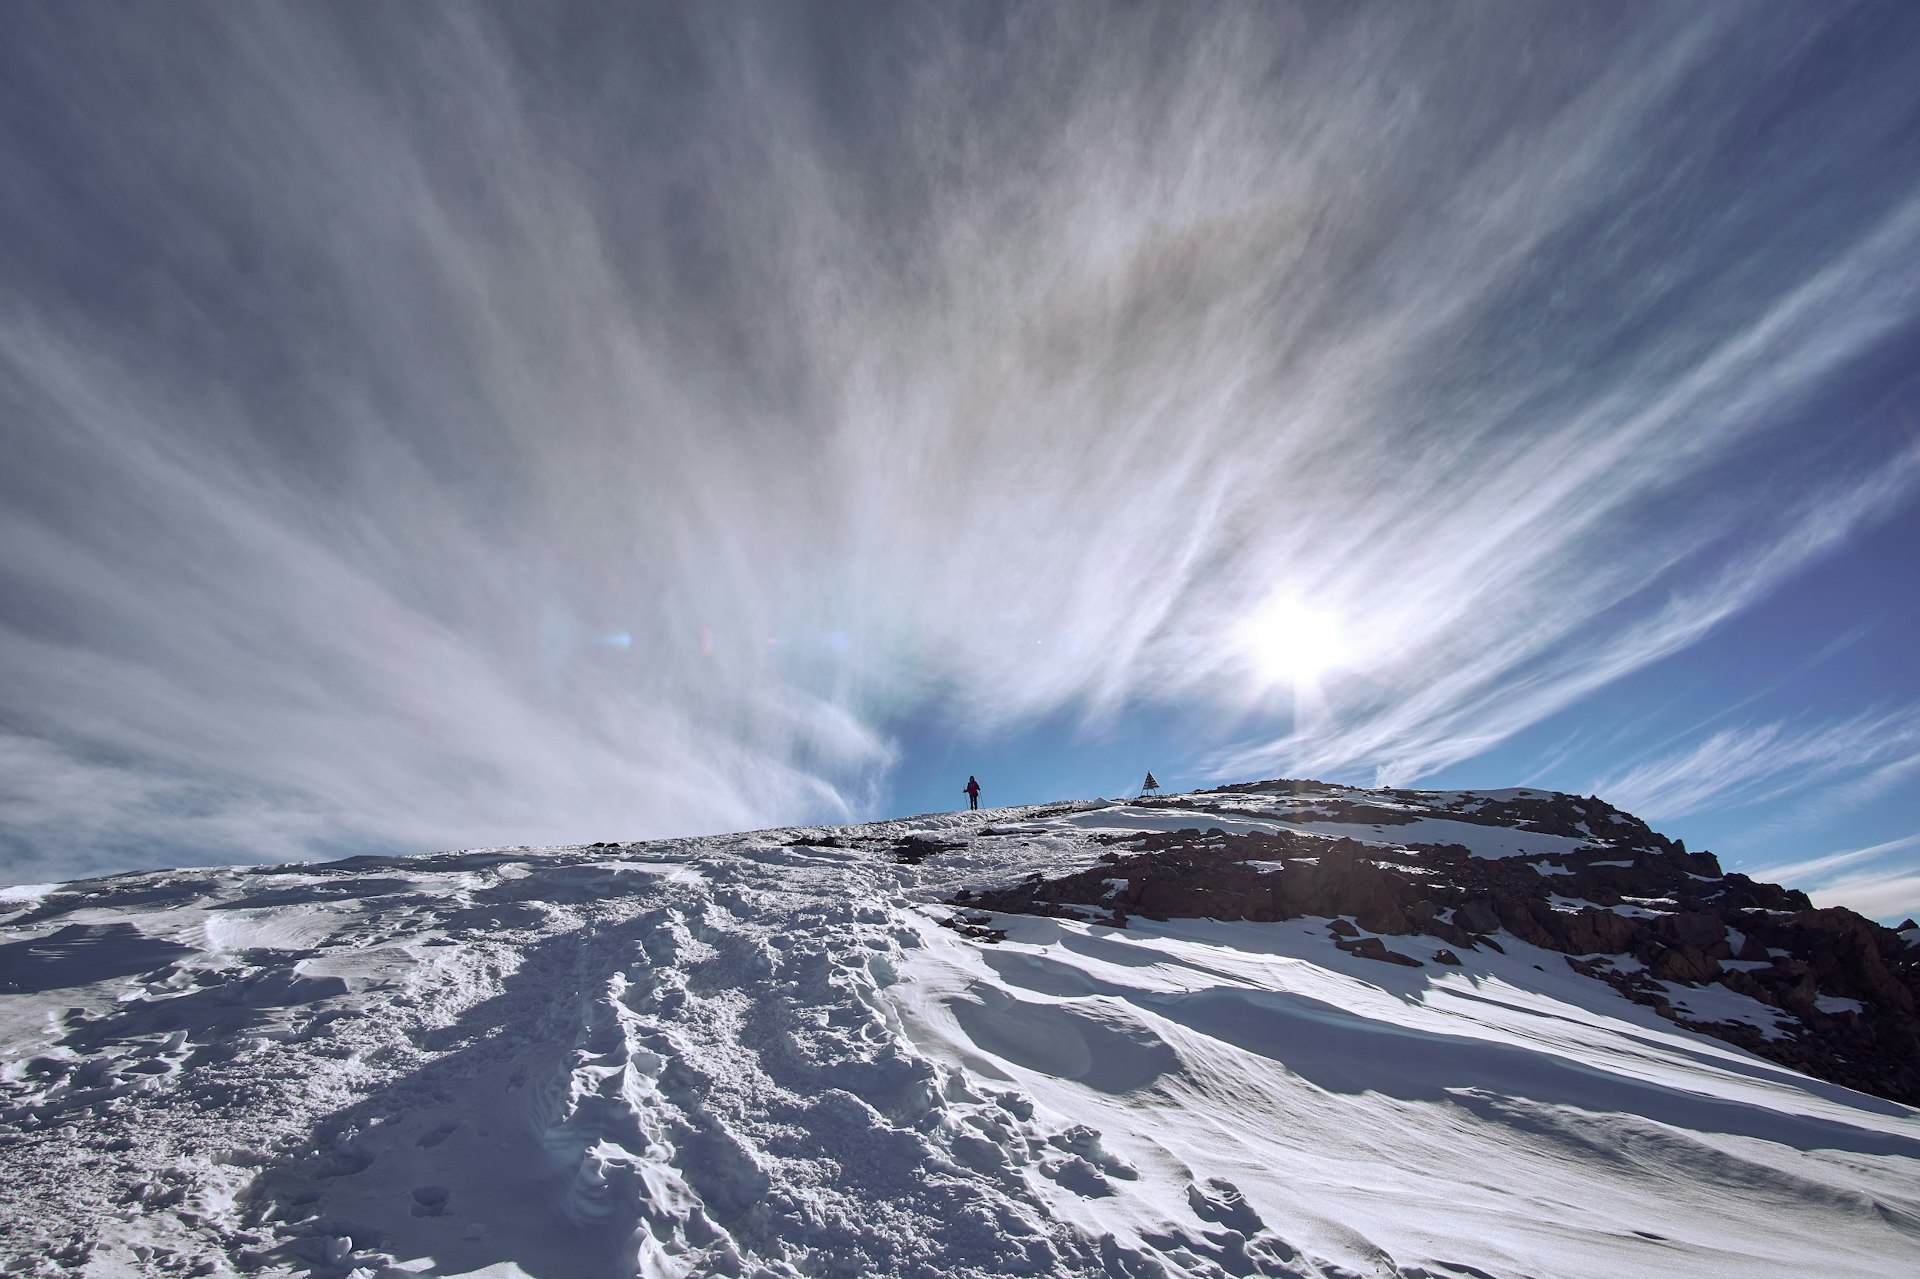 This image looks up a path in the snow towards a triangular cairn at the summit of Jebel Toubkal; a climber is seen approaching the top. The blue sky has wispy clouds.